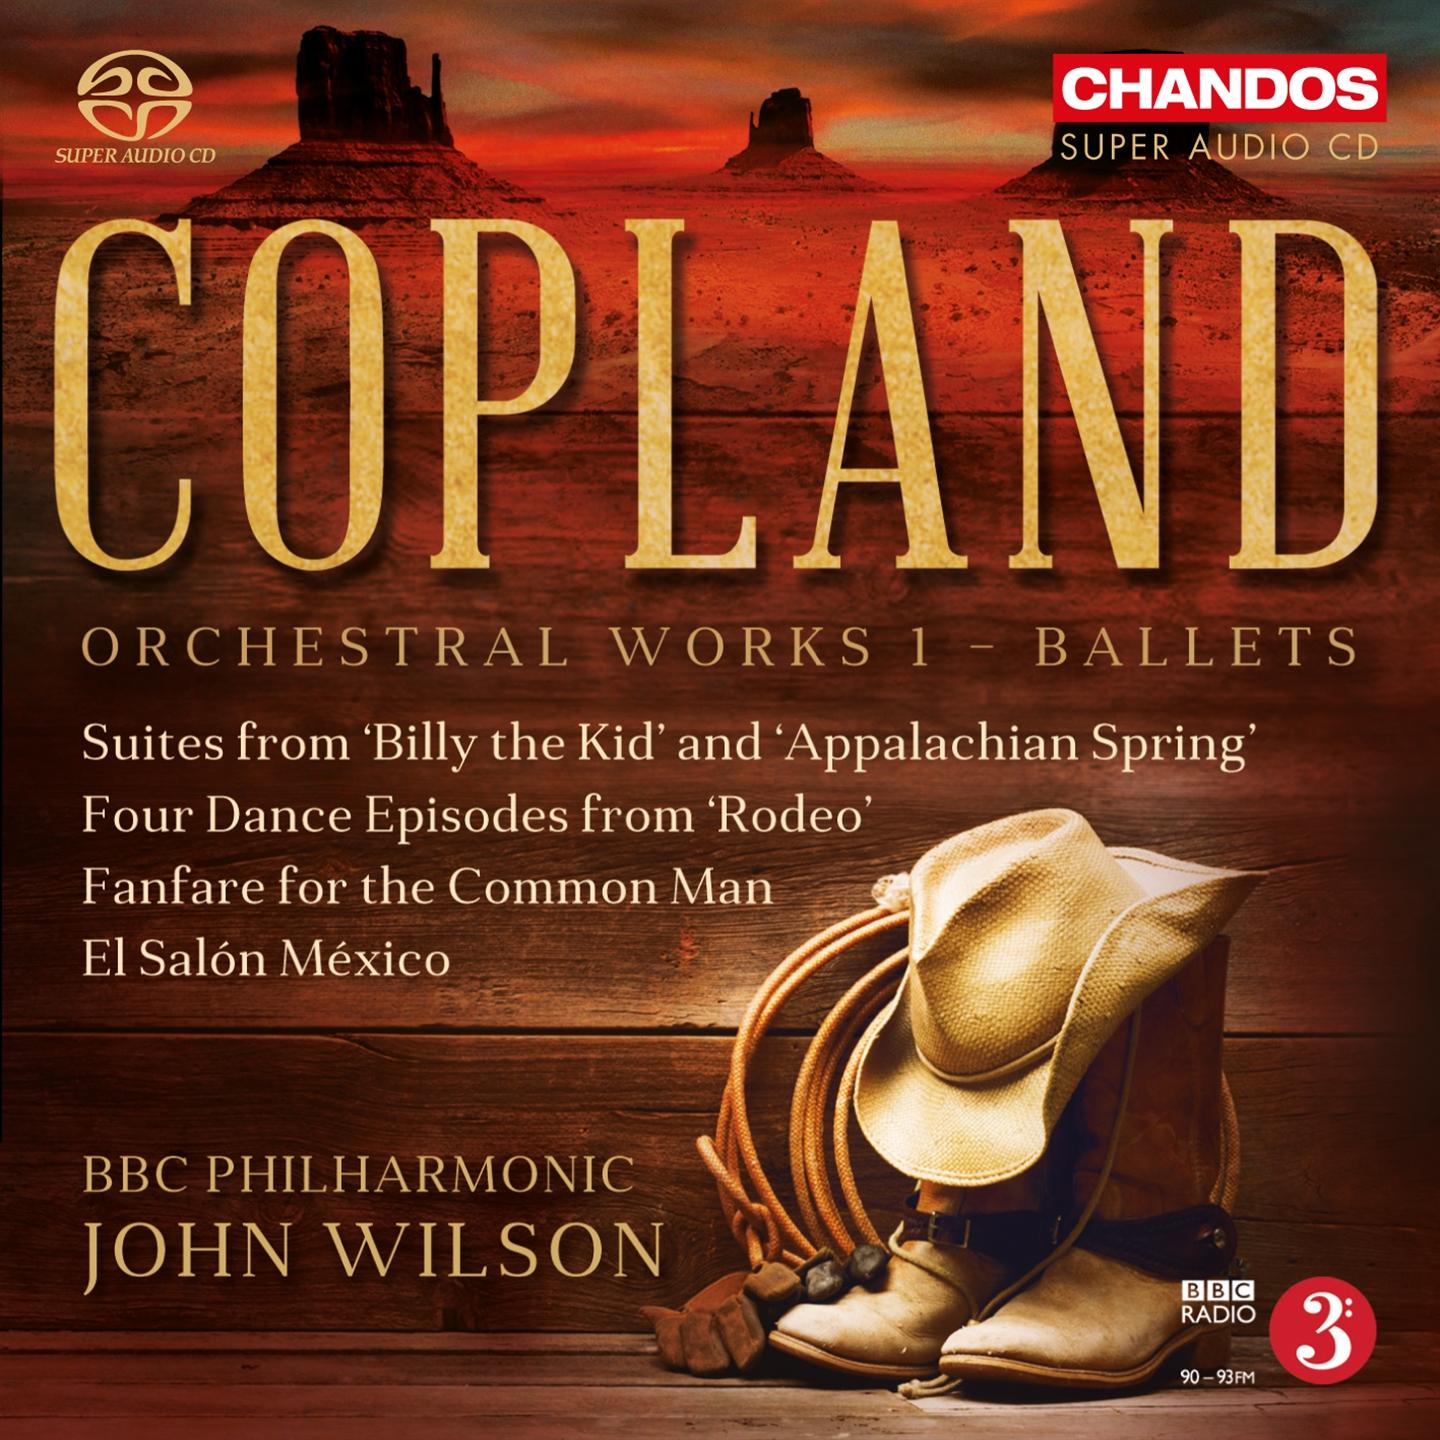 COPLAND: ORCHESTRAL WORKS VOL.1